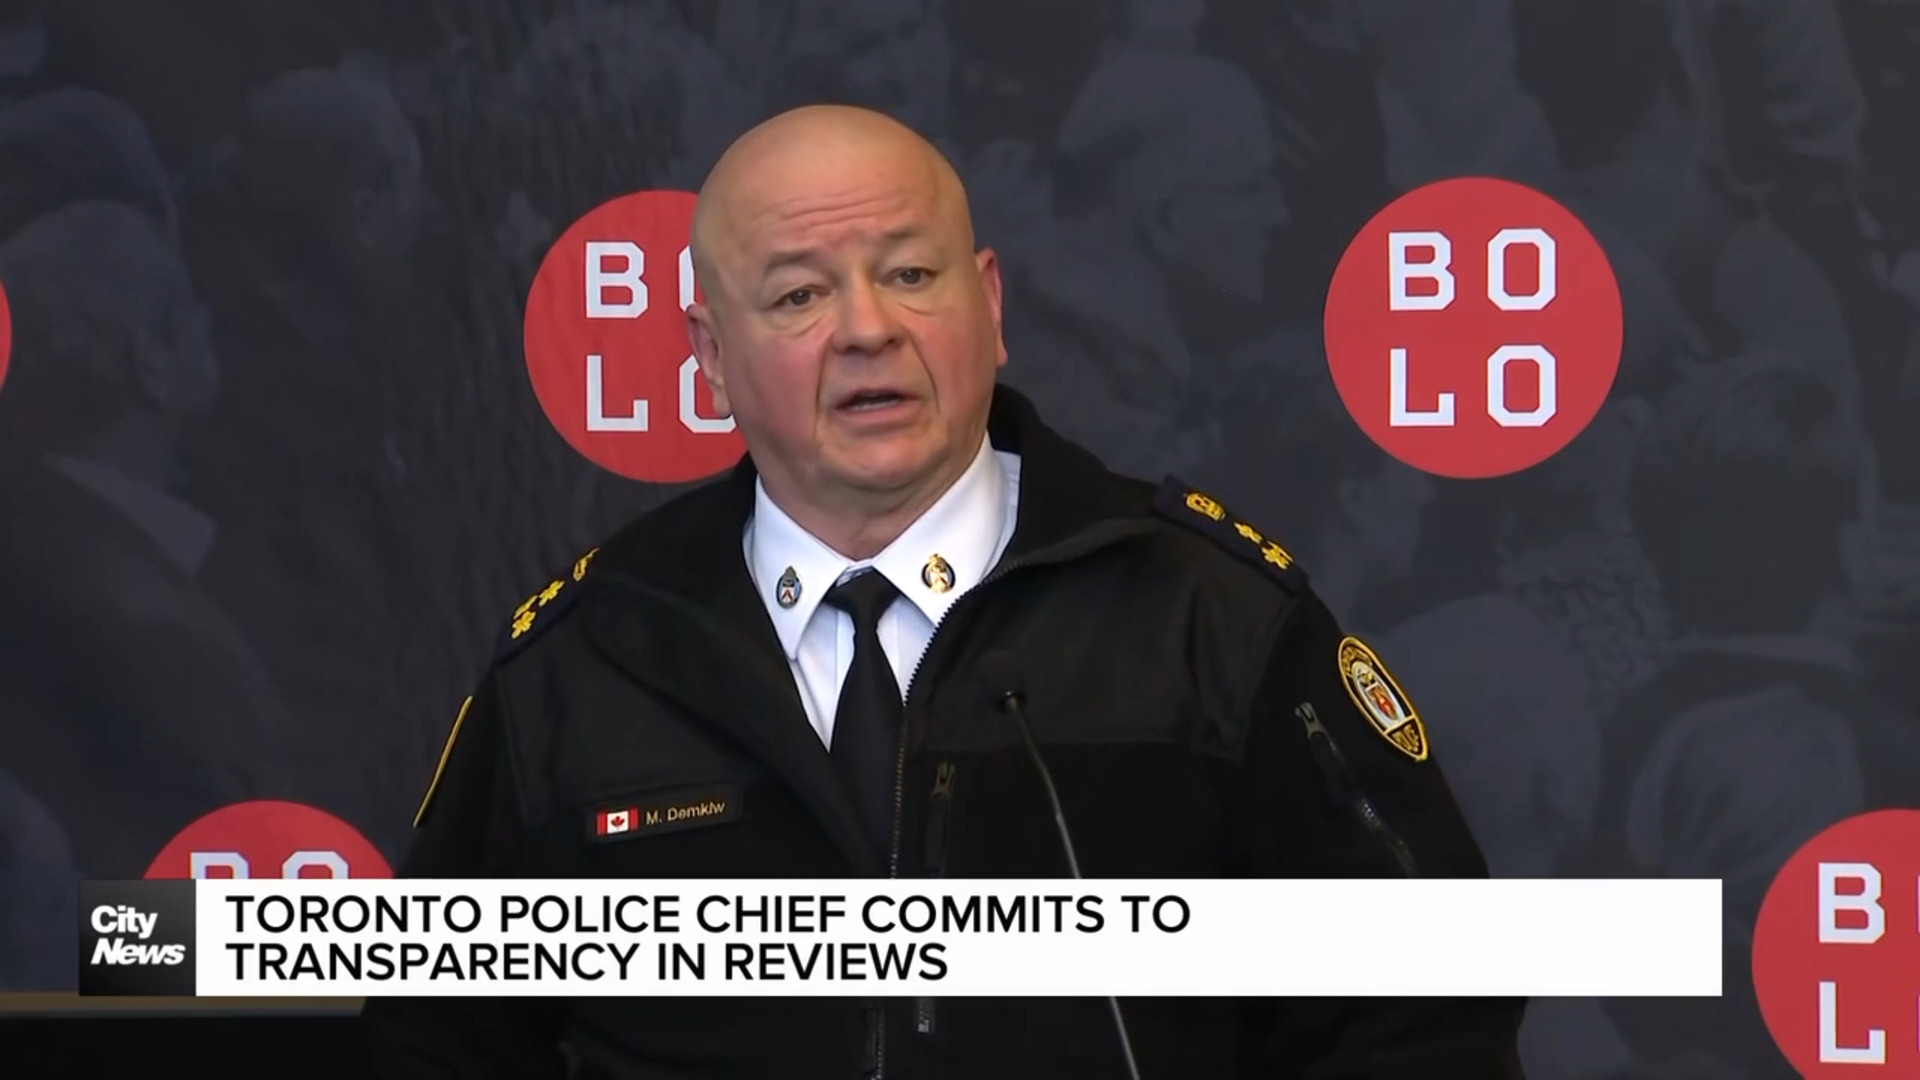 Toronto Police Chief confident OPP review will be unbiased